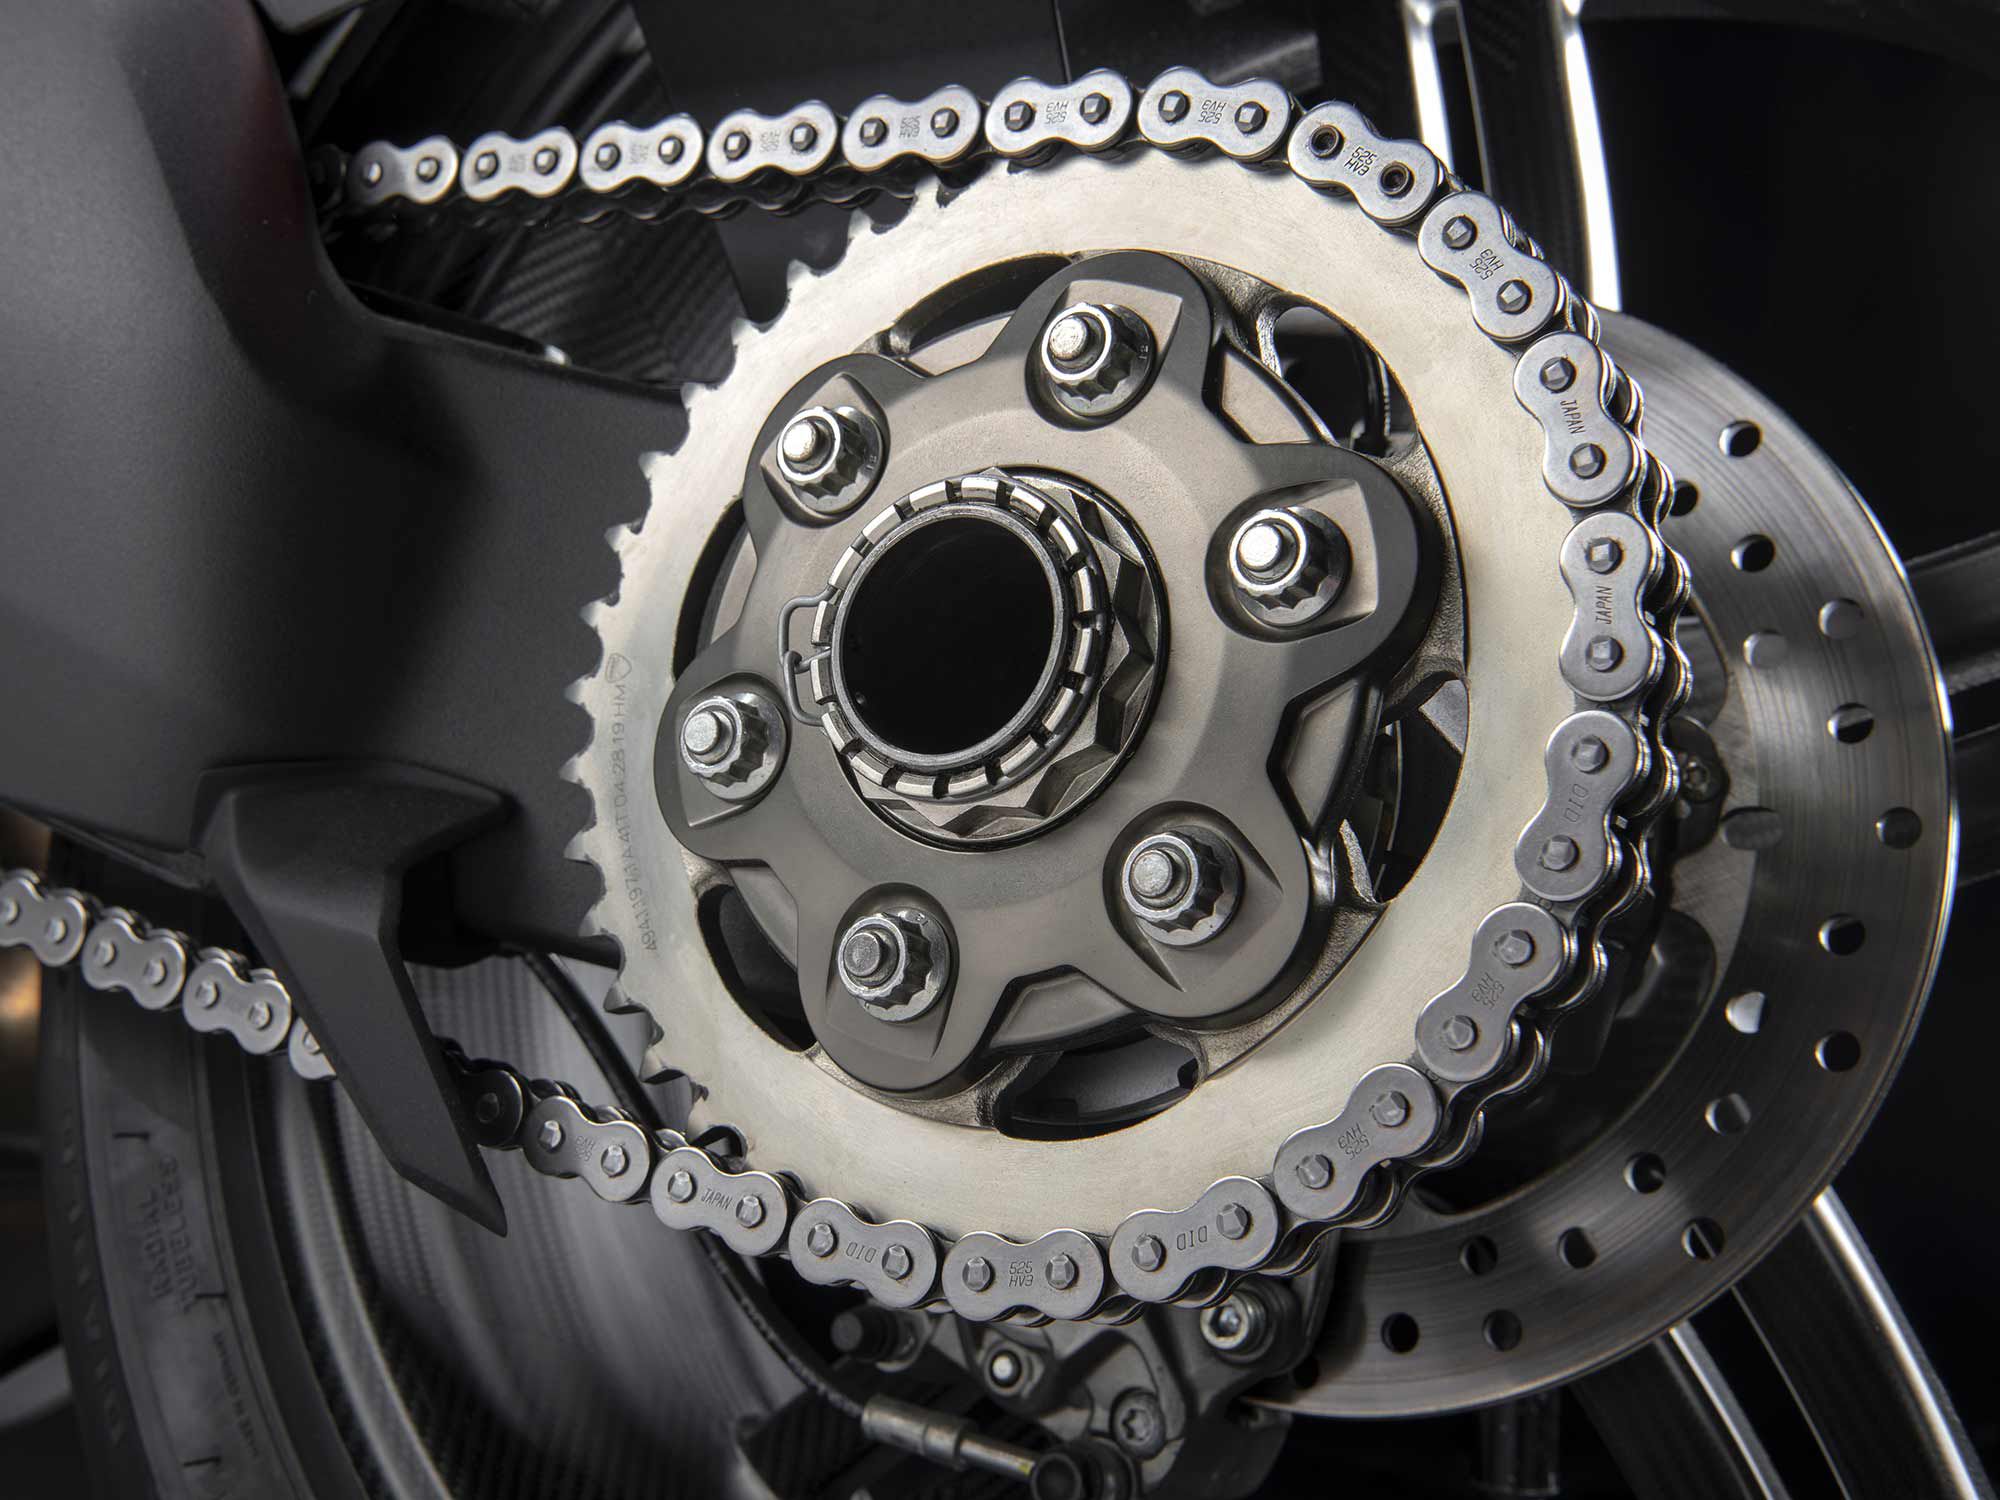 The final drive and 520 chain are lighter on the SP2 than the standard V4.